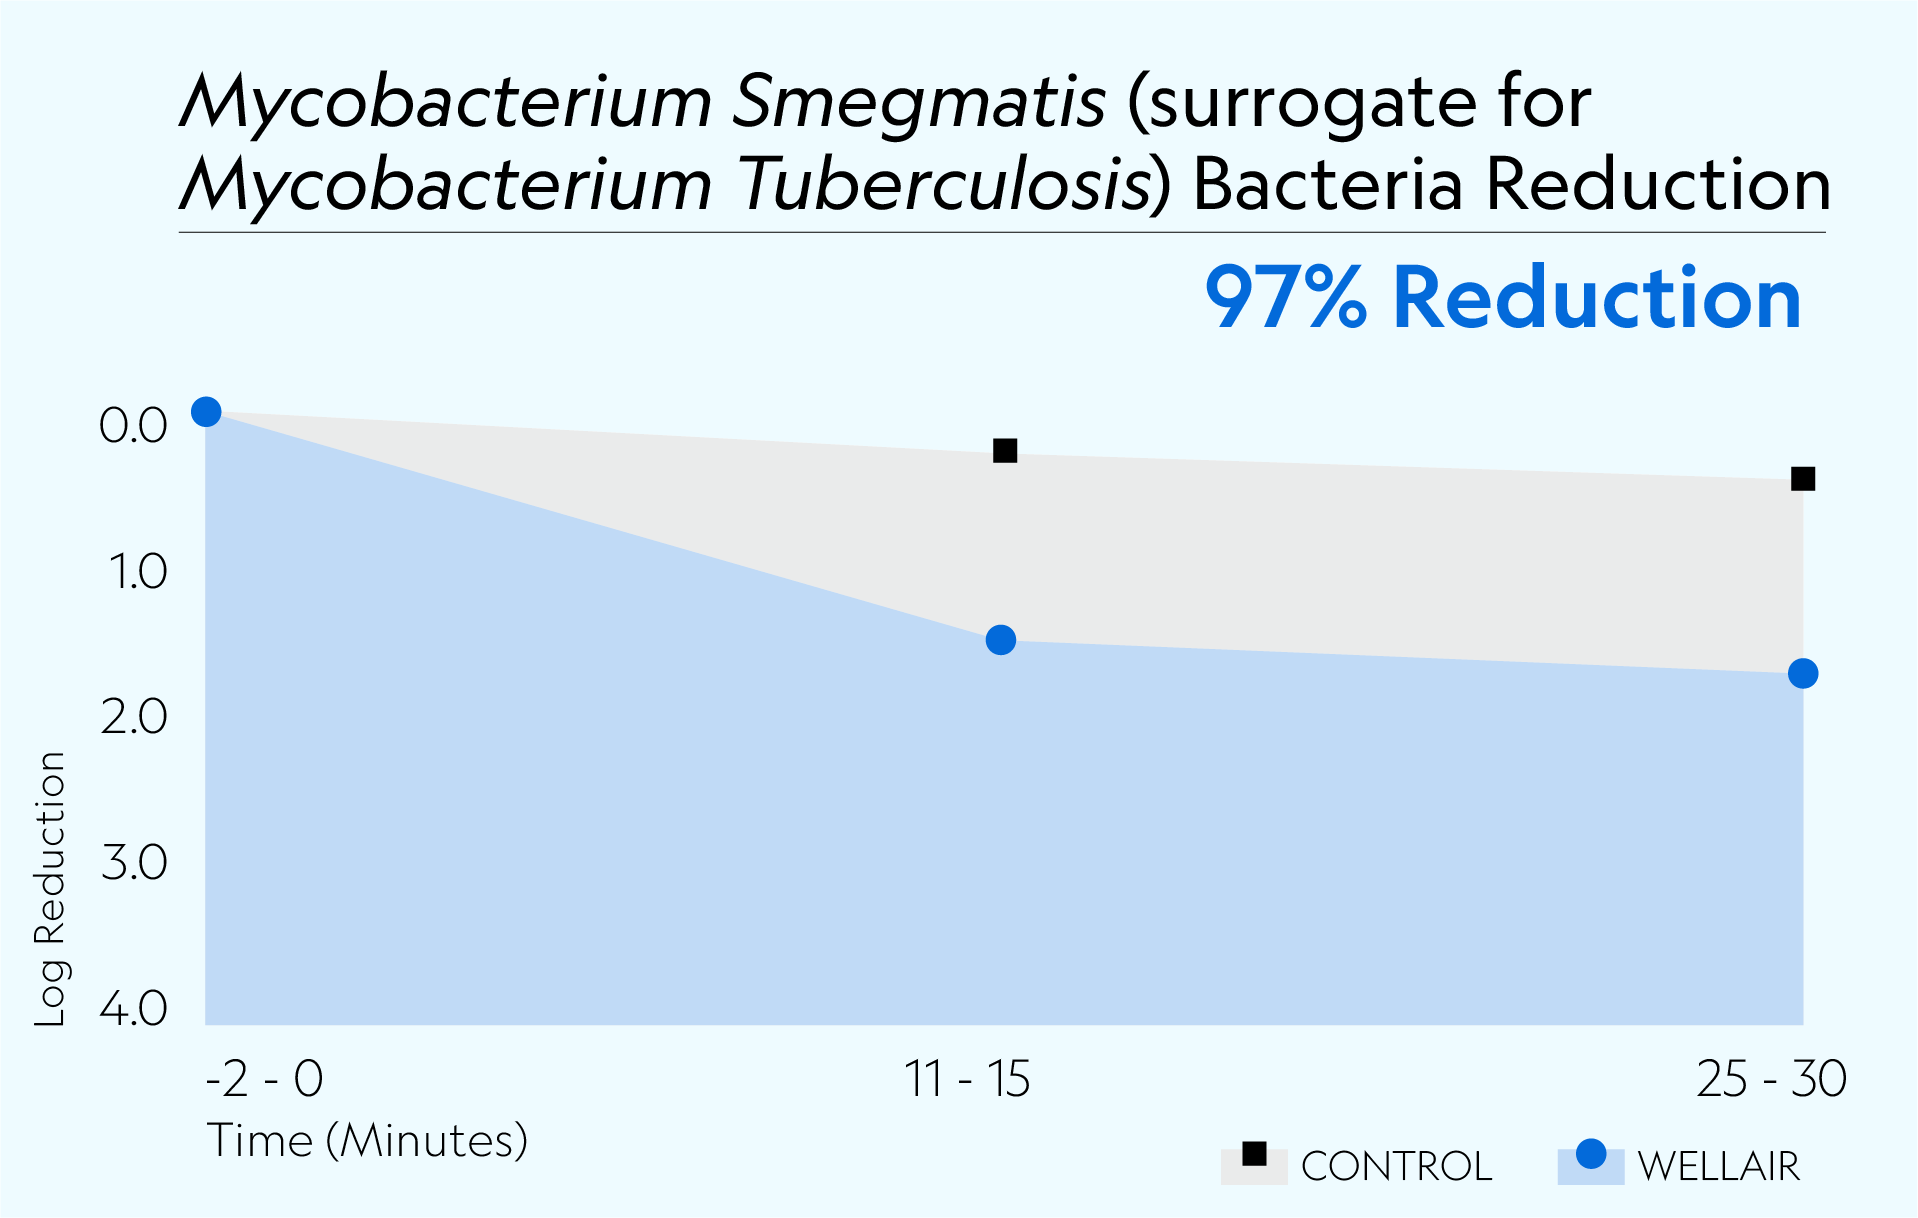 Defend 1050 achieved 97% reduction of Tuberculosis surrogate